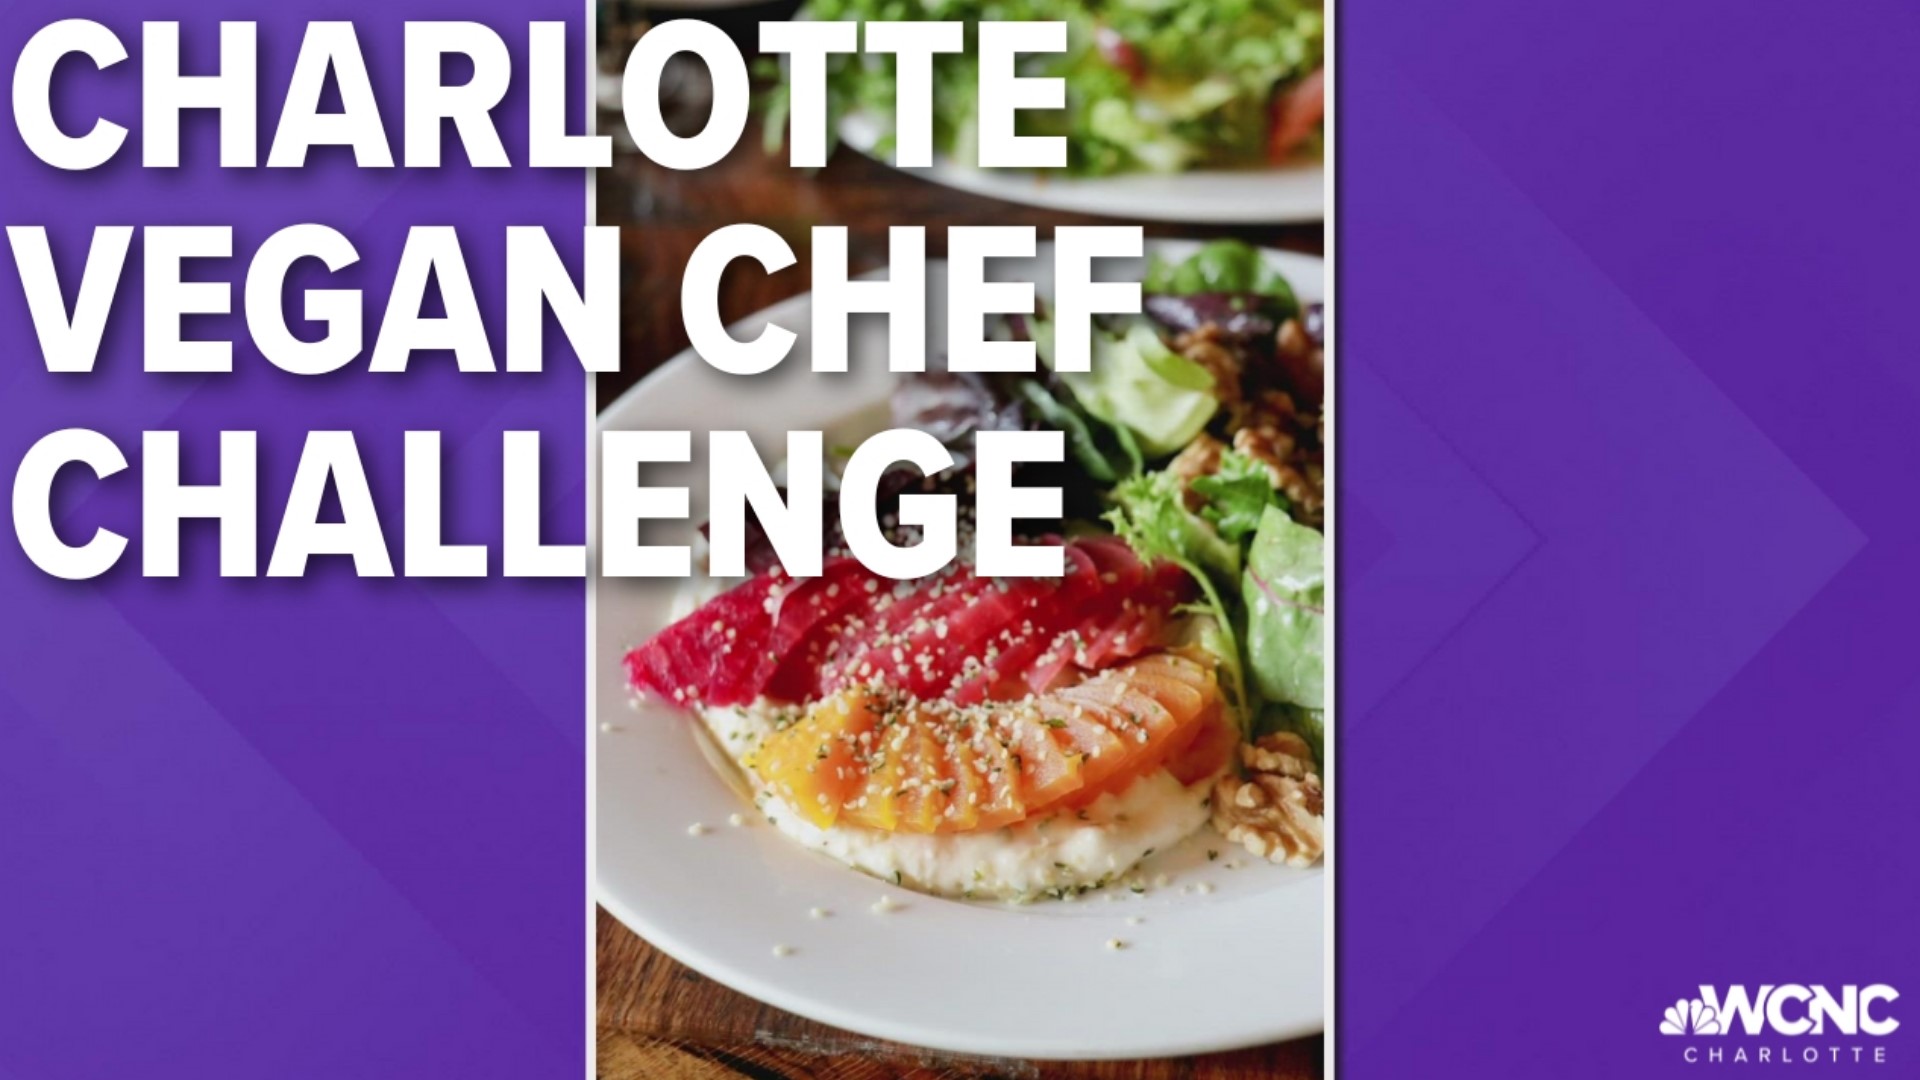 Several restaurants across the Charlotte area are taking part in the first annual Charlotte Vegan Chef Challenge.